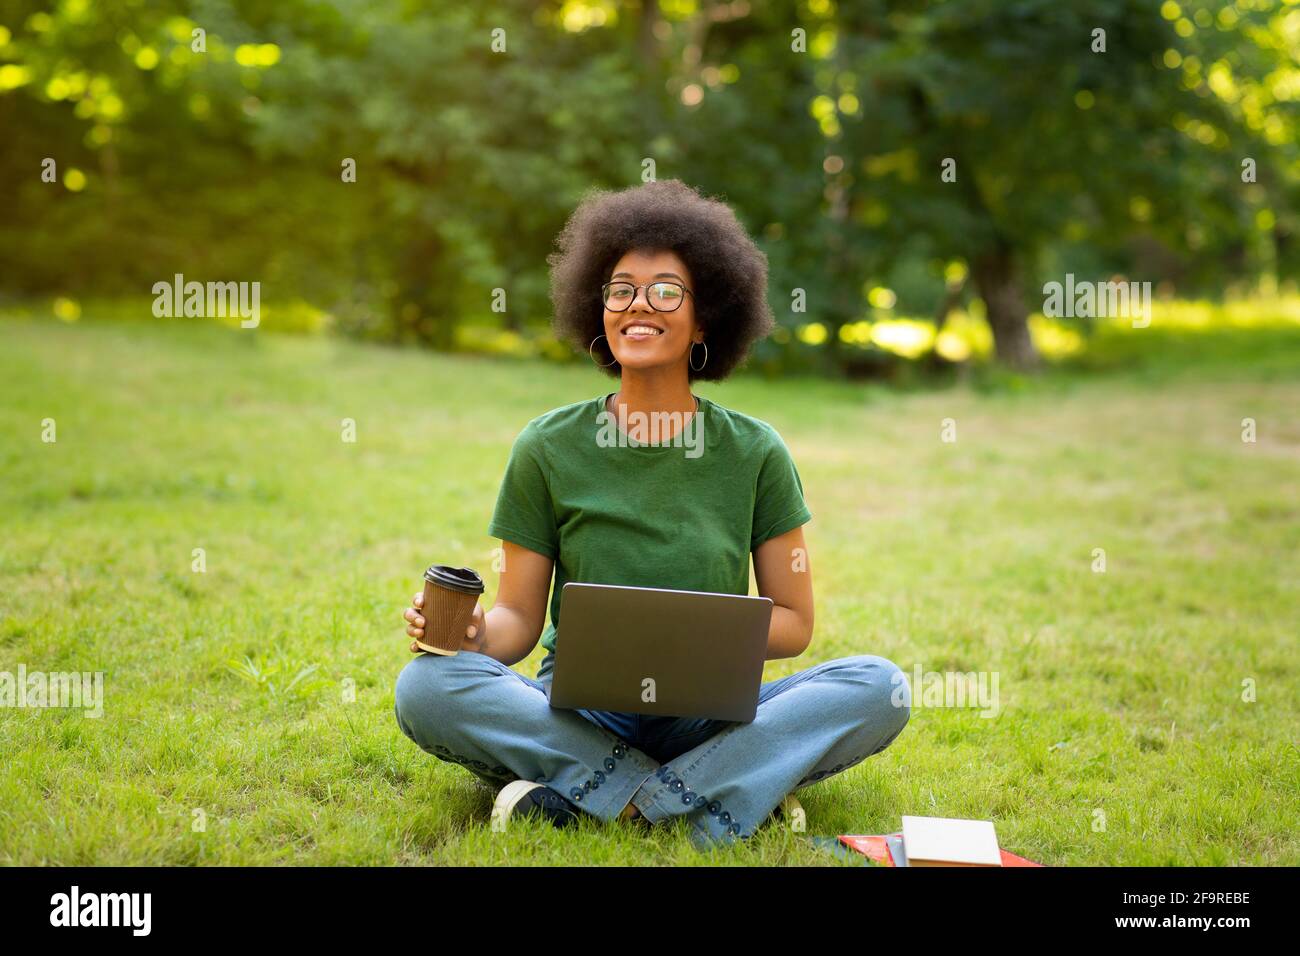 Rest At Campus. African Student Girl Relaxing Outdoors With Coffee And Laptop Stock Photo